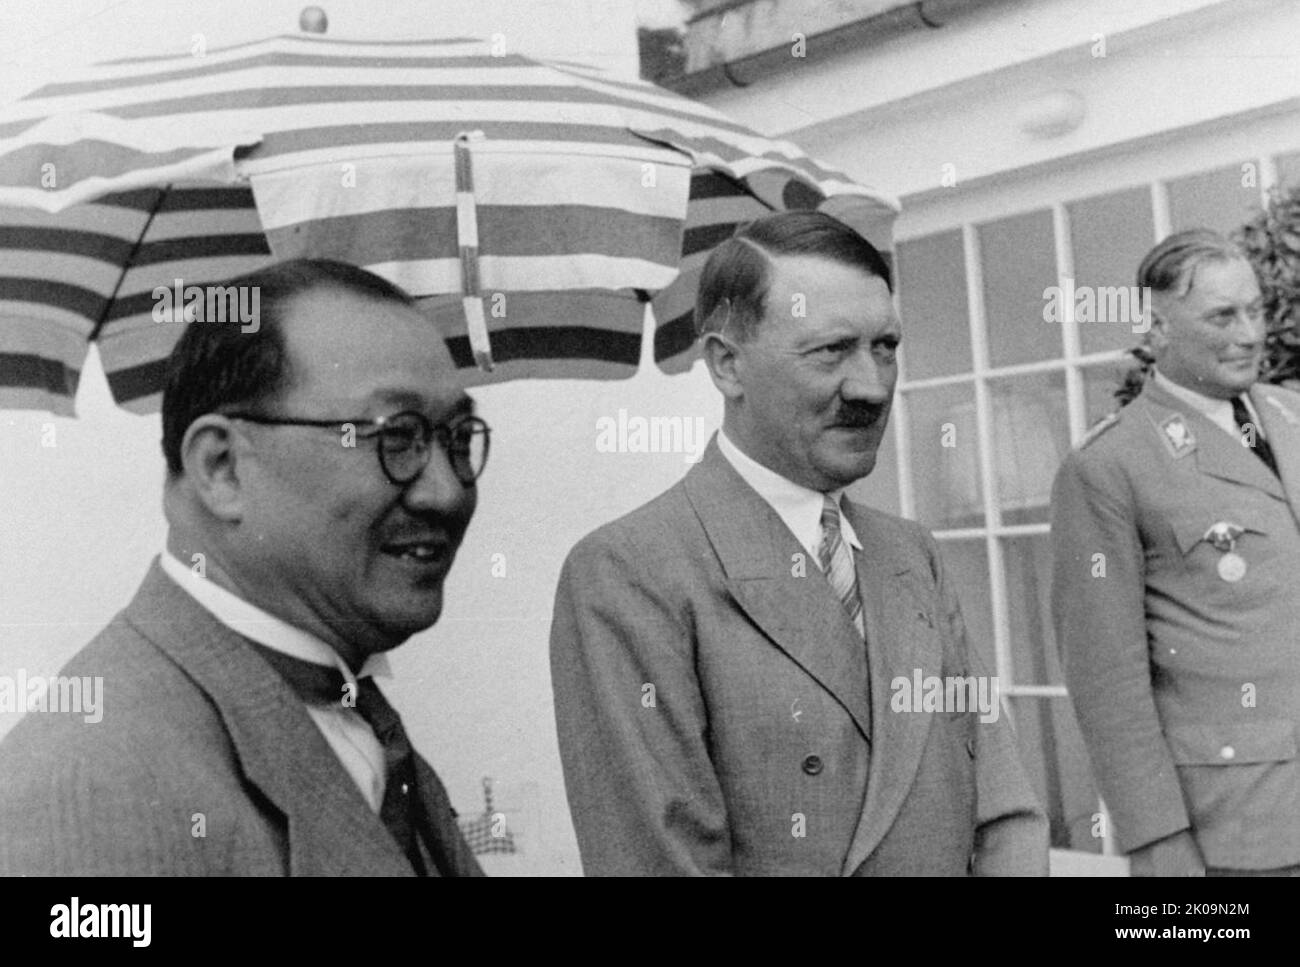 Mr. Kung Hsiang-hsi met with Adolf Hitler of Nazi Germany in 1936. Kung Hsiang-hsi (1881 - 1967), often known as Dr. H. H. Kung, was a Chinese banker and politician in the early 20th century. He married Soong Ai-ling, the eldest of the three Soong sisters; the other two married President Sun Yat-sen and the latter President Chiang Kai-shek. Together with his brother-in-law, Soong Tse-ven, he was highly influential in determining the economic policies of the Kuomintang-led Nationalist government of the Republic of China in the 1930s and 1940s. Stock Photo